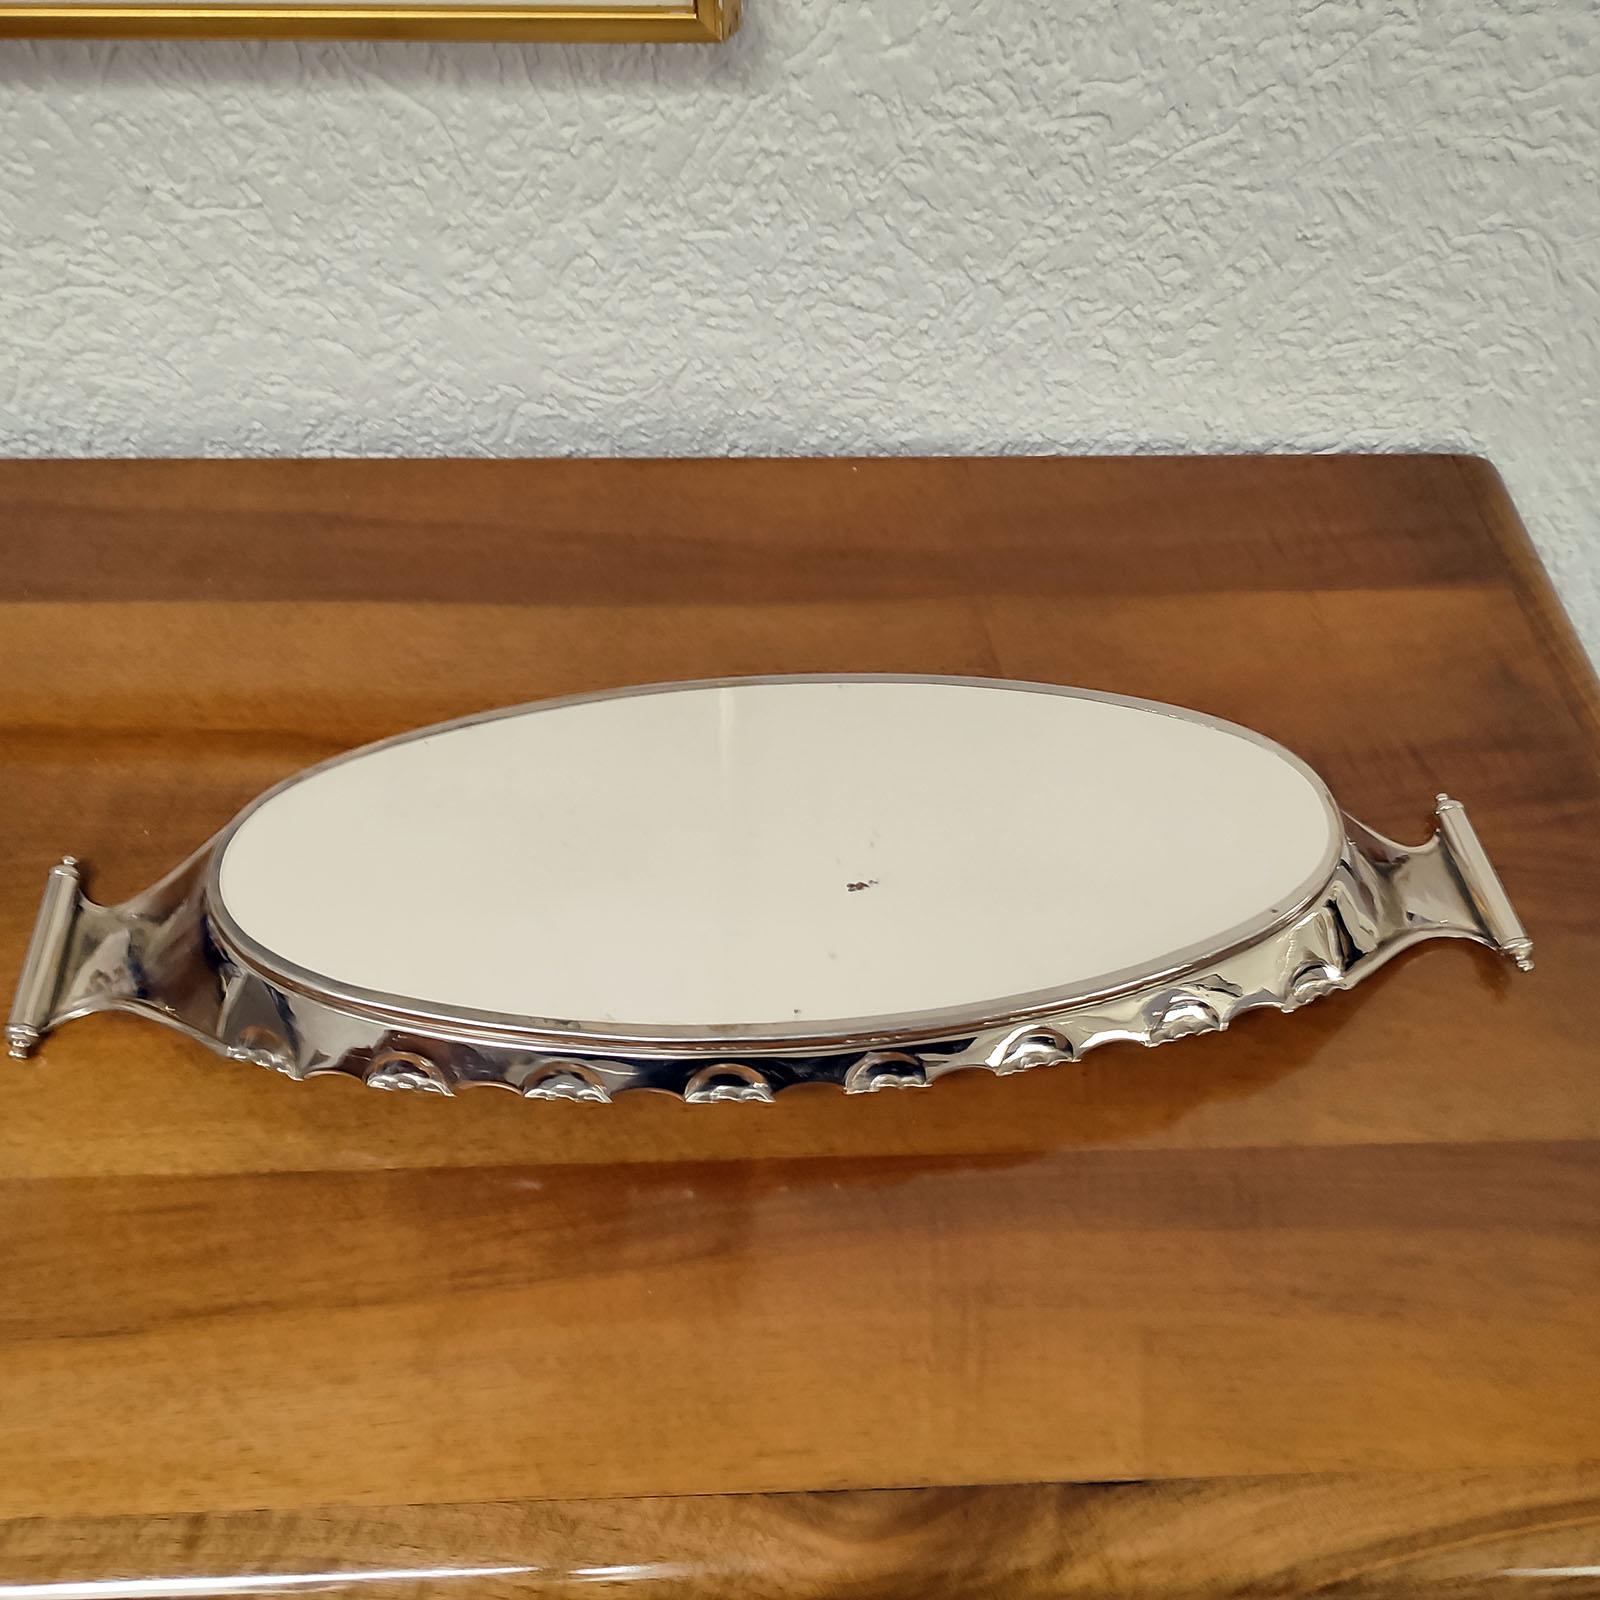 Art Nouveau Villeroy & Boch Silver Plated Serving Tray, circa 1900 For Sale 4